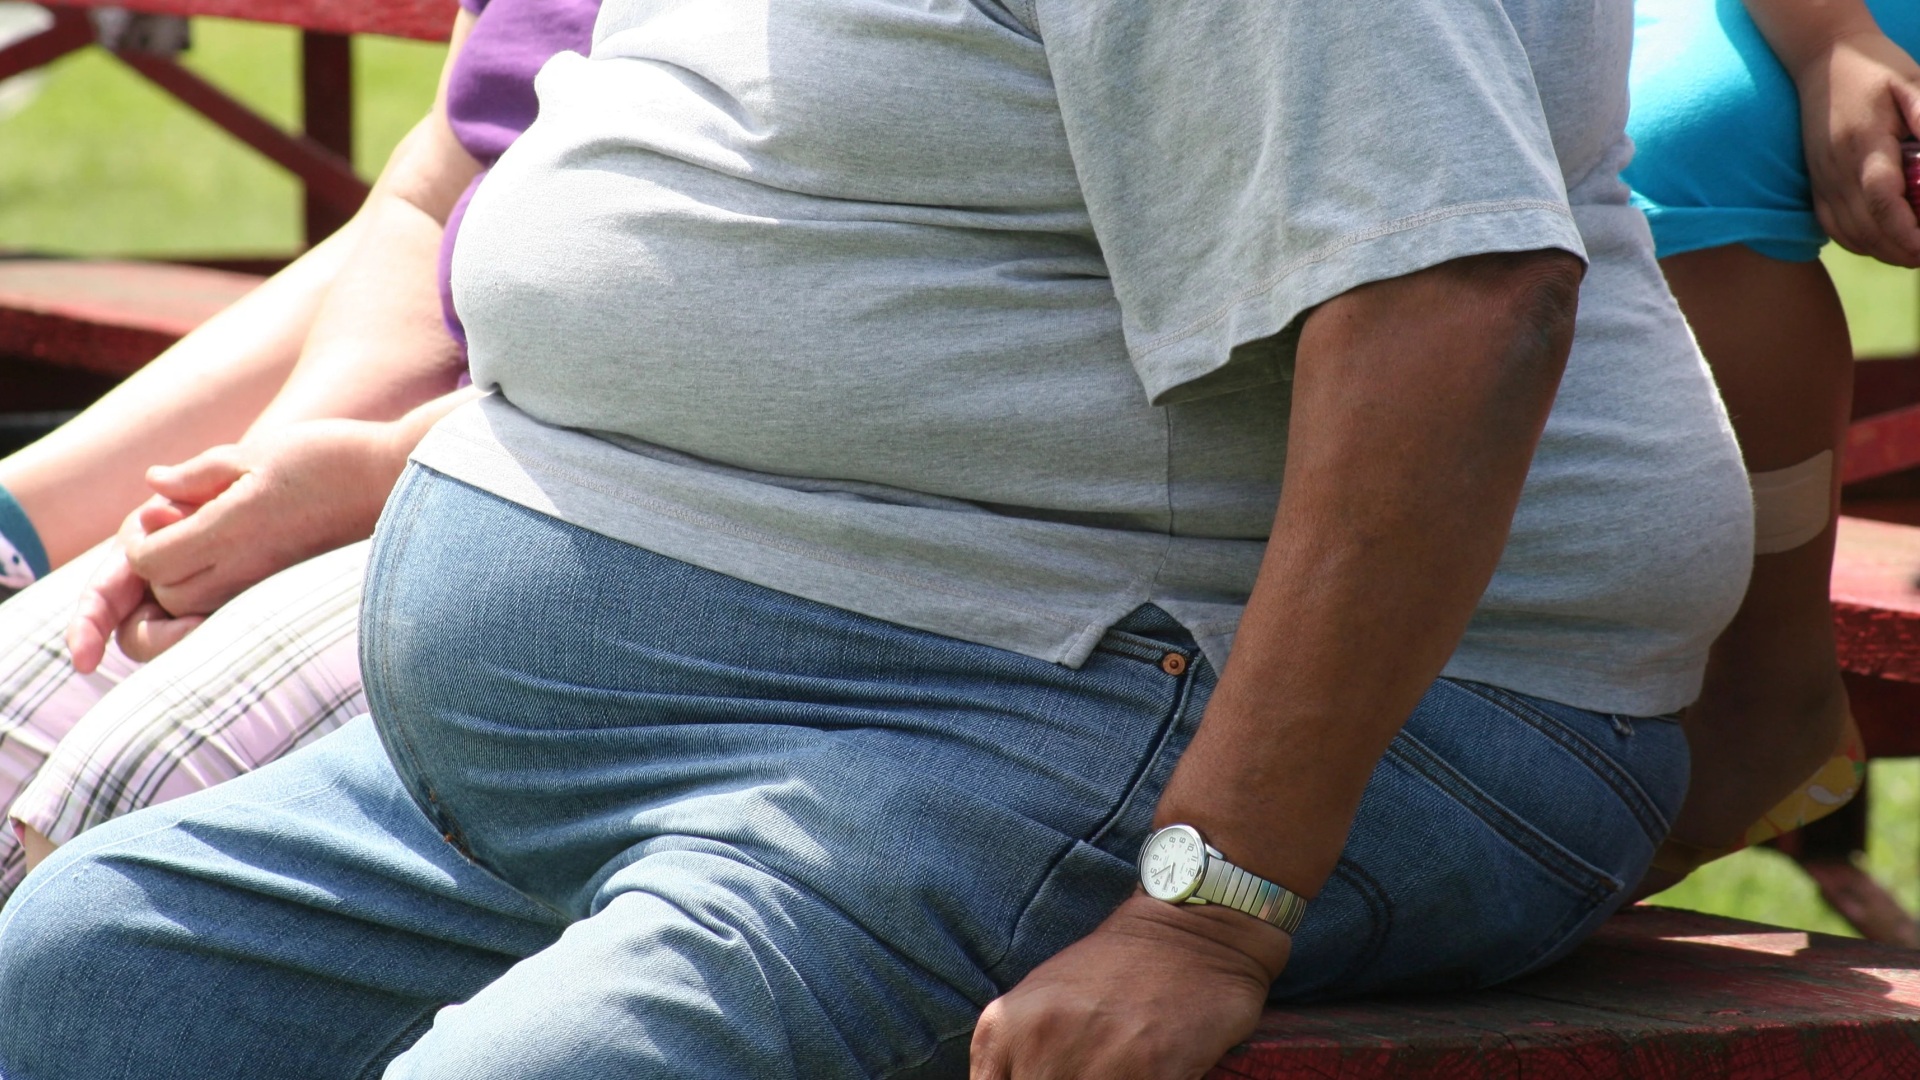 Waist Sizes Of Obese Persons From The CDC